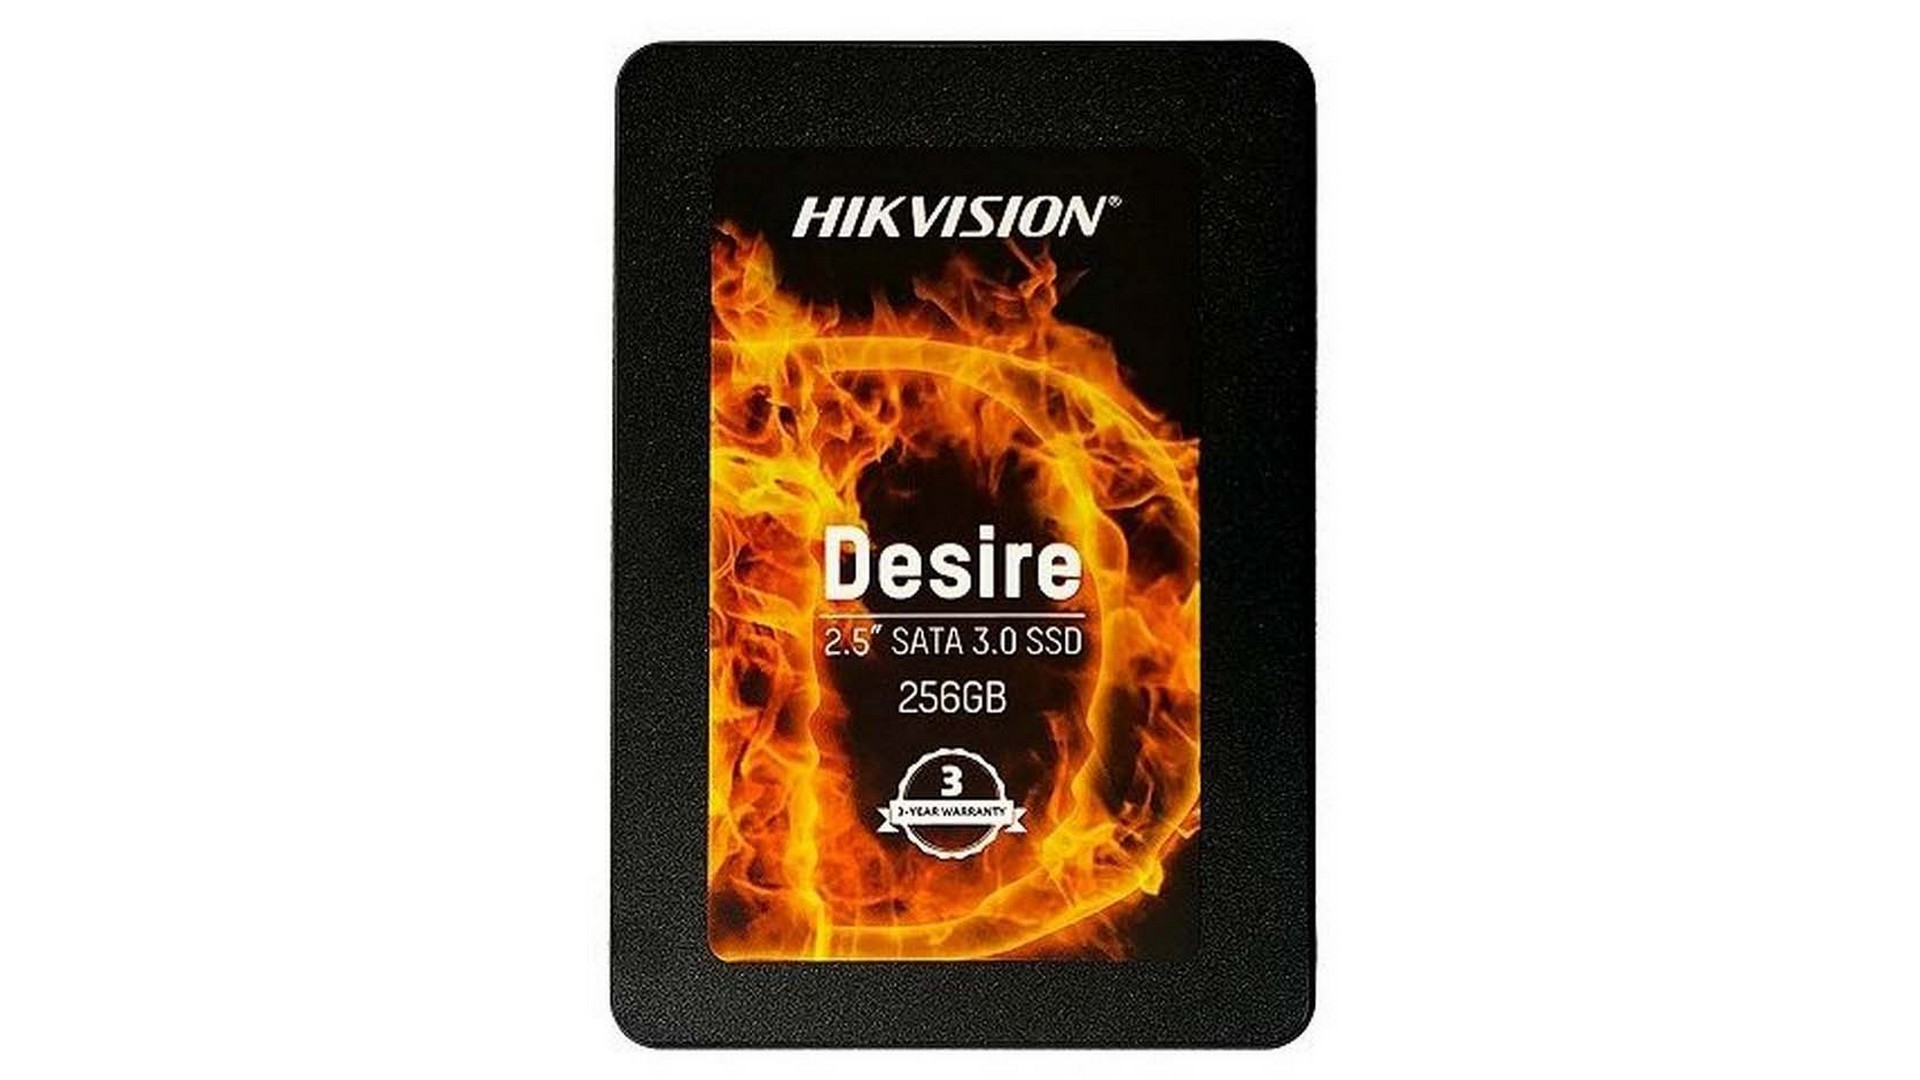 Ổ cứng SSD Hikvision HS Desire 256GB (2.5" | SATA 3 | 500/370 MBs)